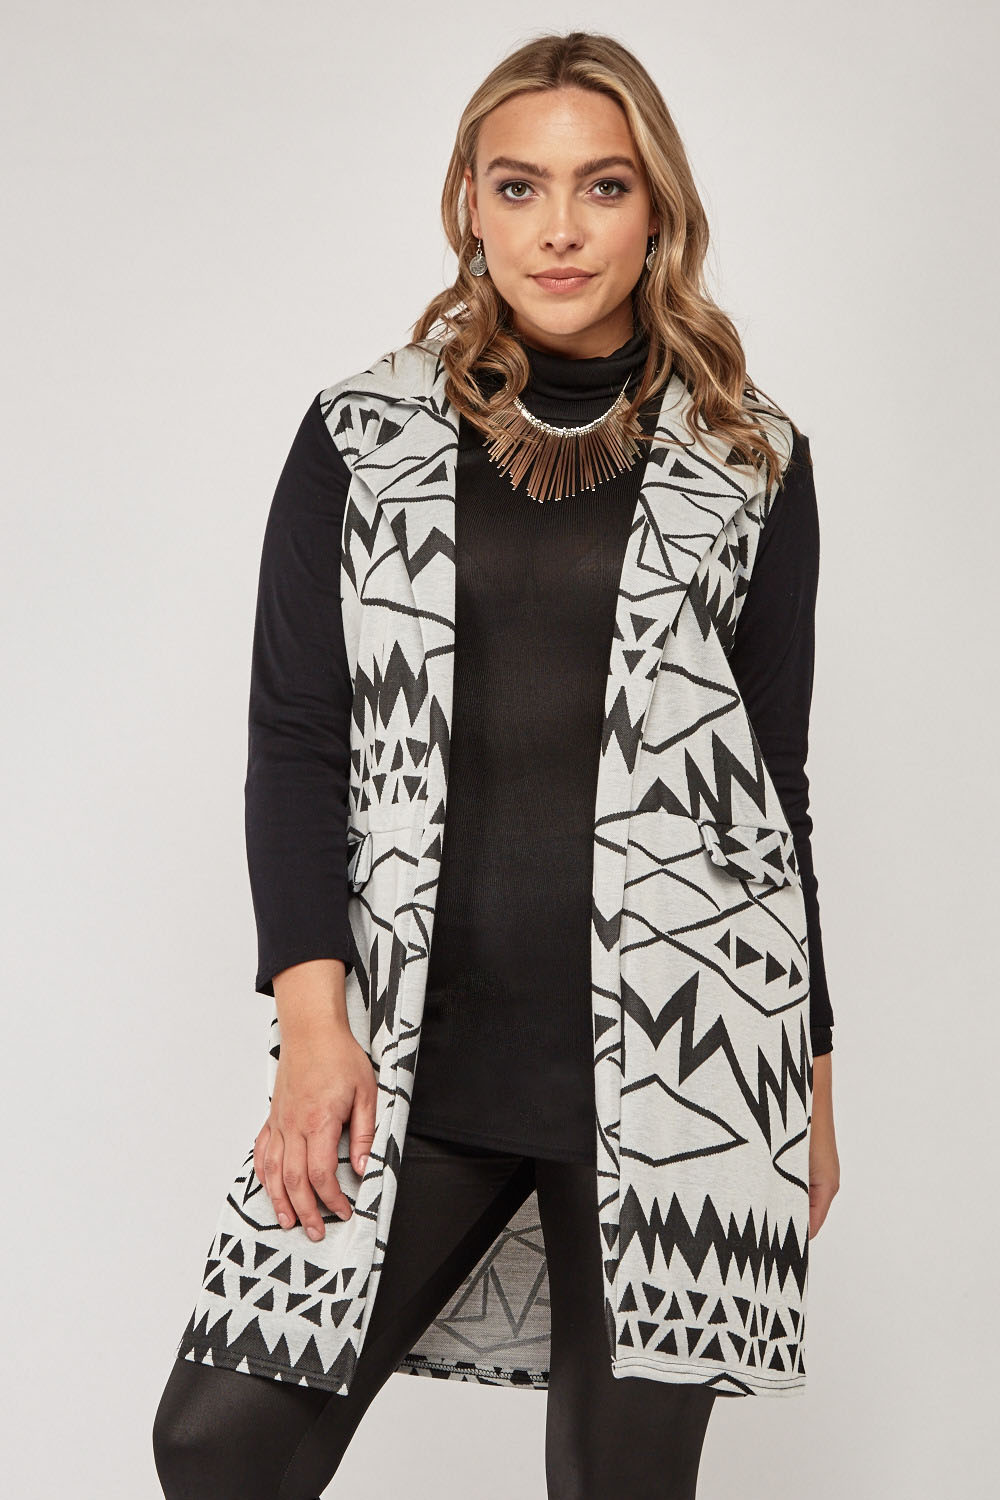 Aztec Print Contrasted Jacket - Just $7